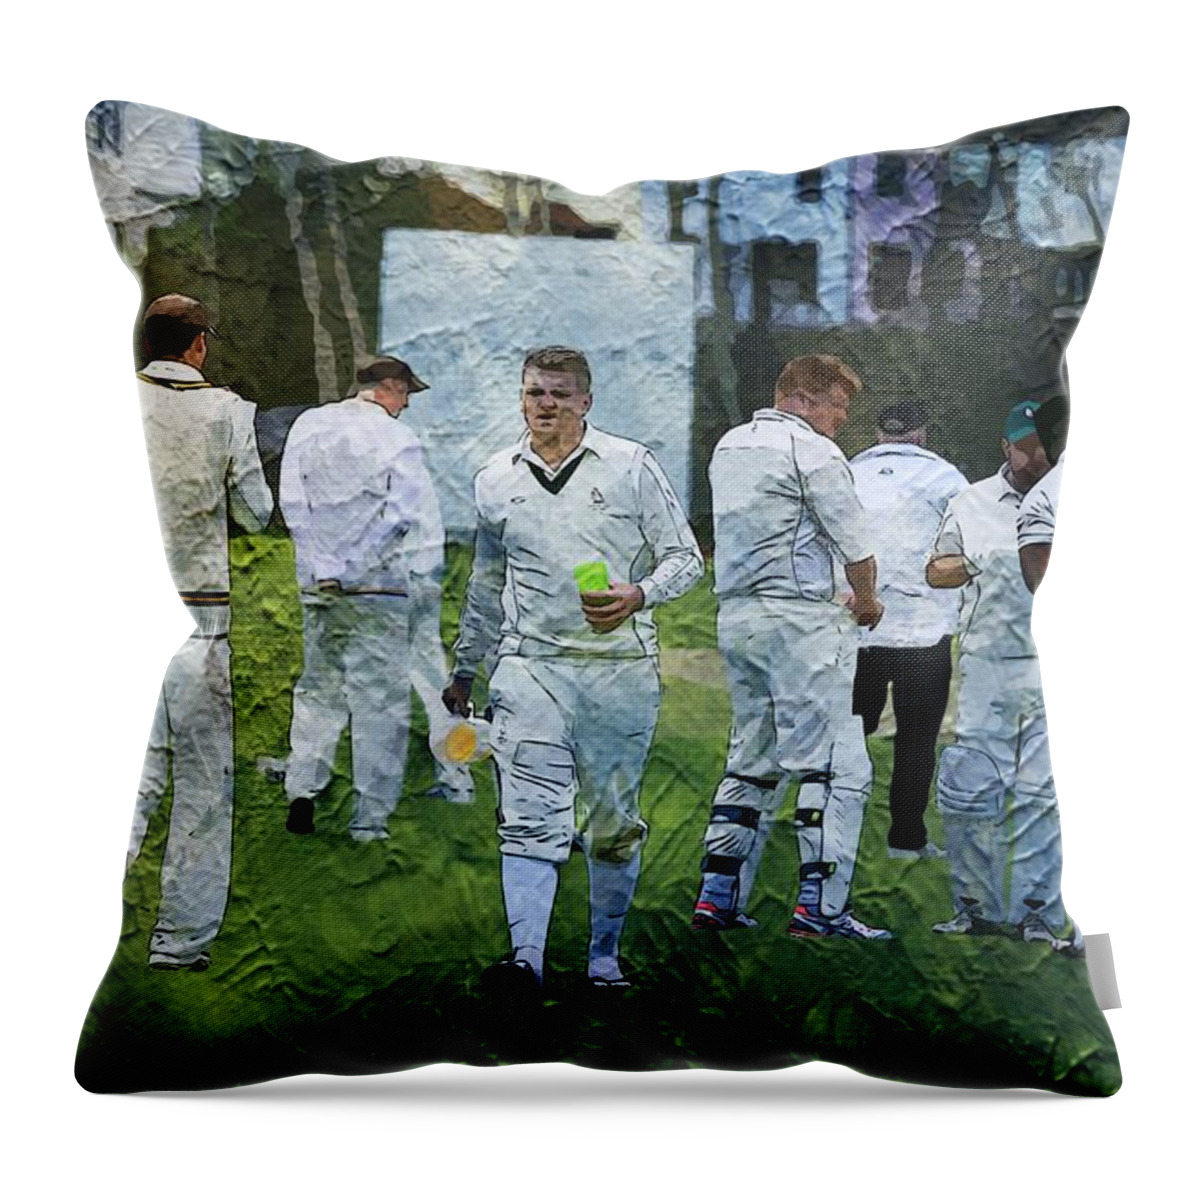 Sports Throw Pillow featuring the photograph Club Cricket Tea Break by Zahra Majid